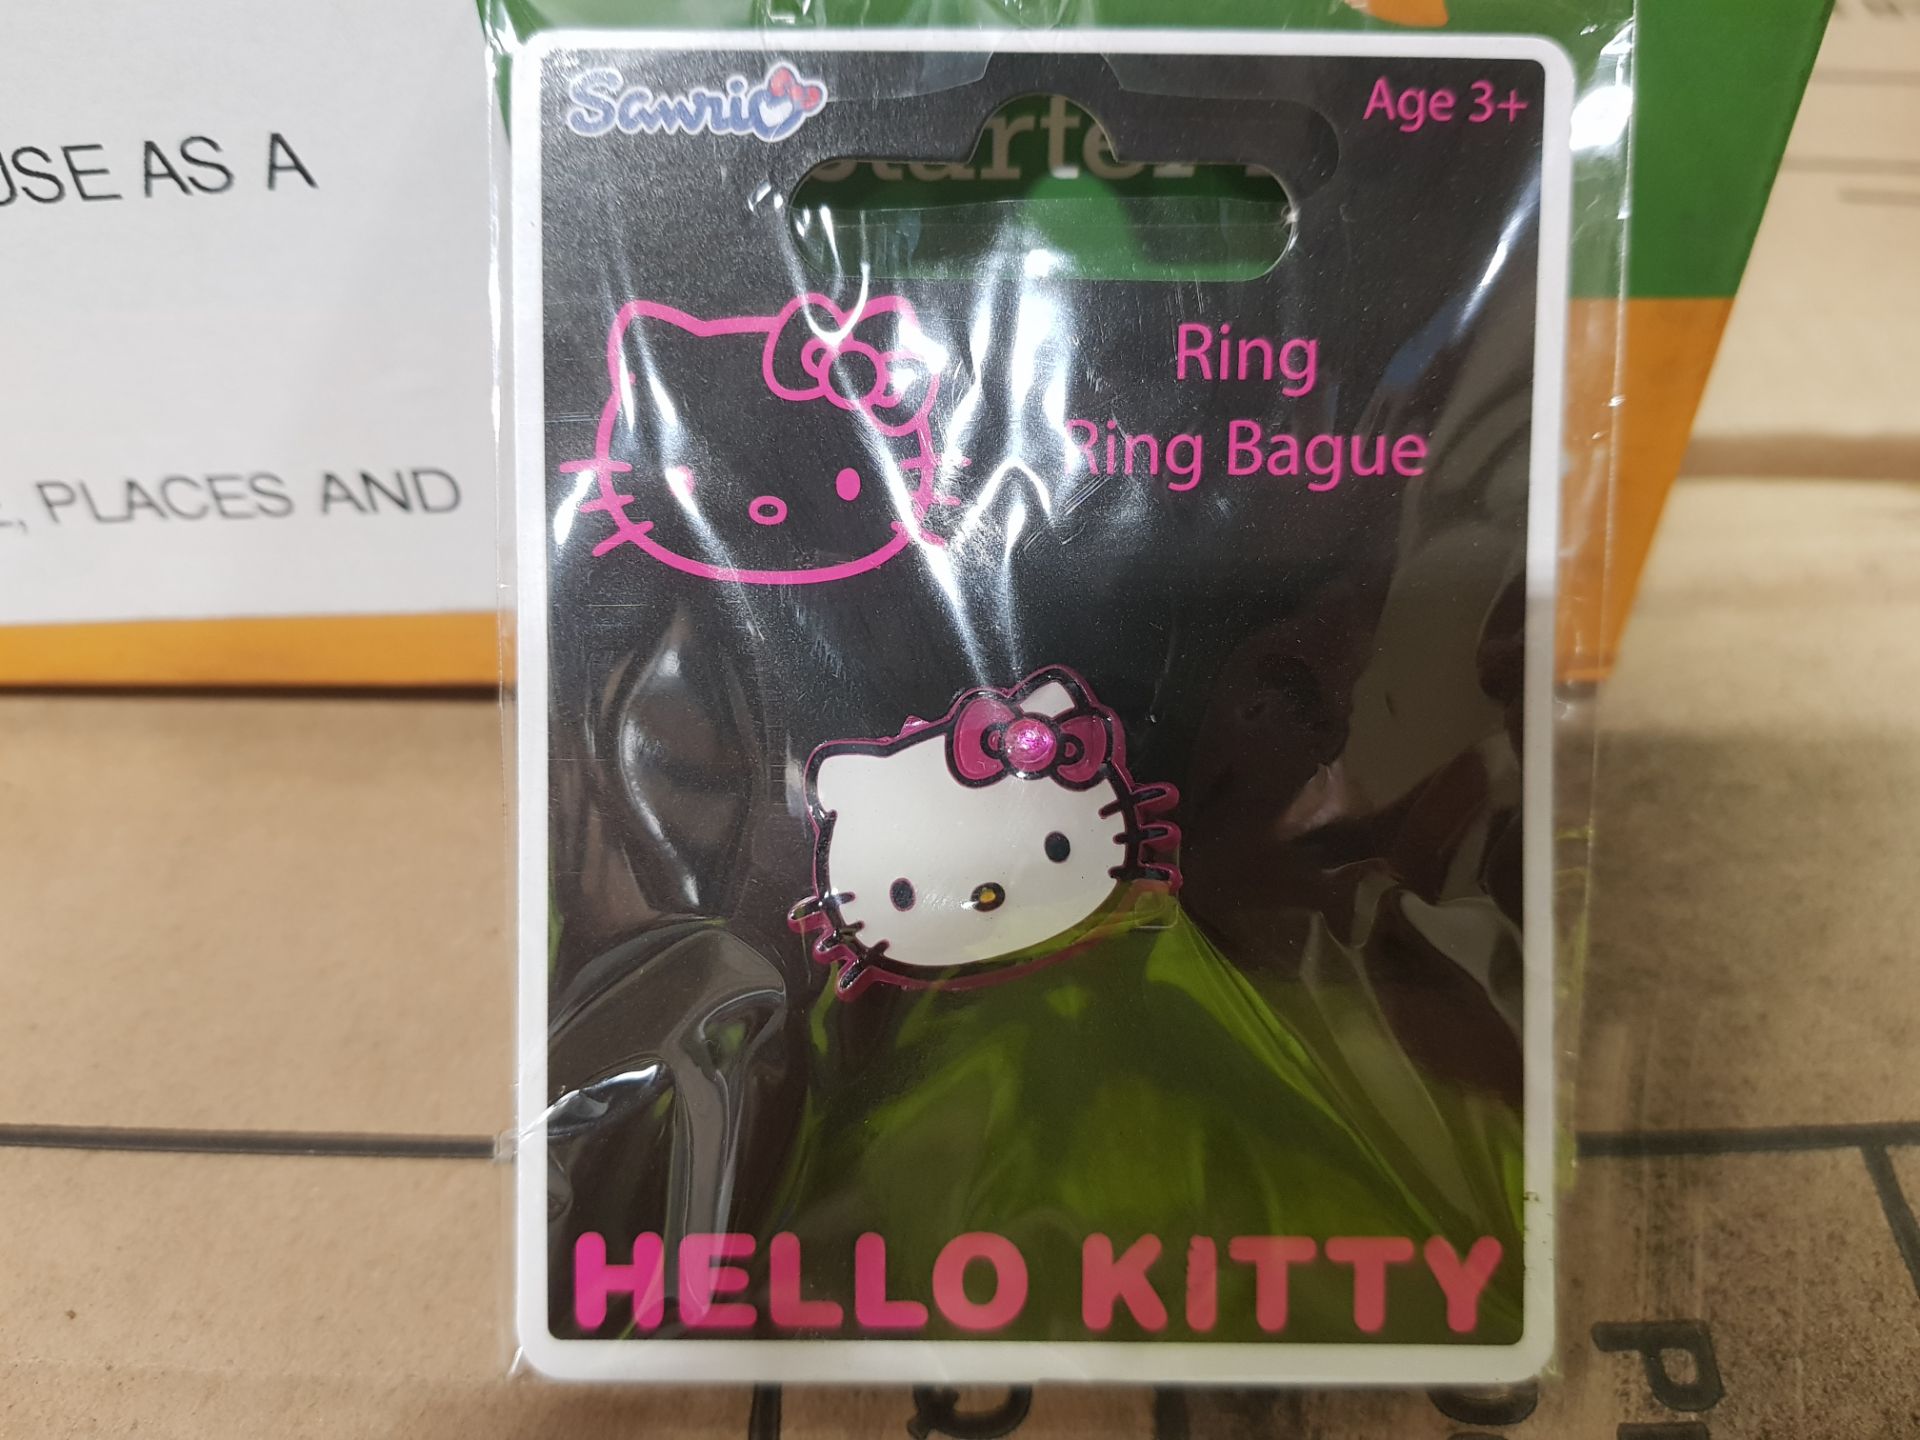 360 X HELLO KITTY CHILDRENS RING IN RETAIL PACK AGE 3+ IN 15 CARTONS